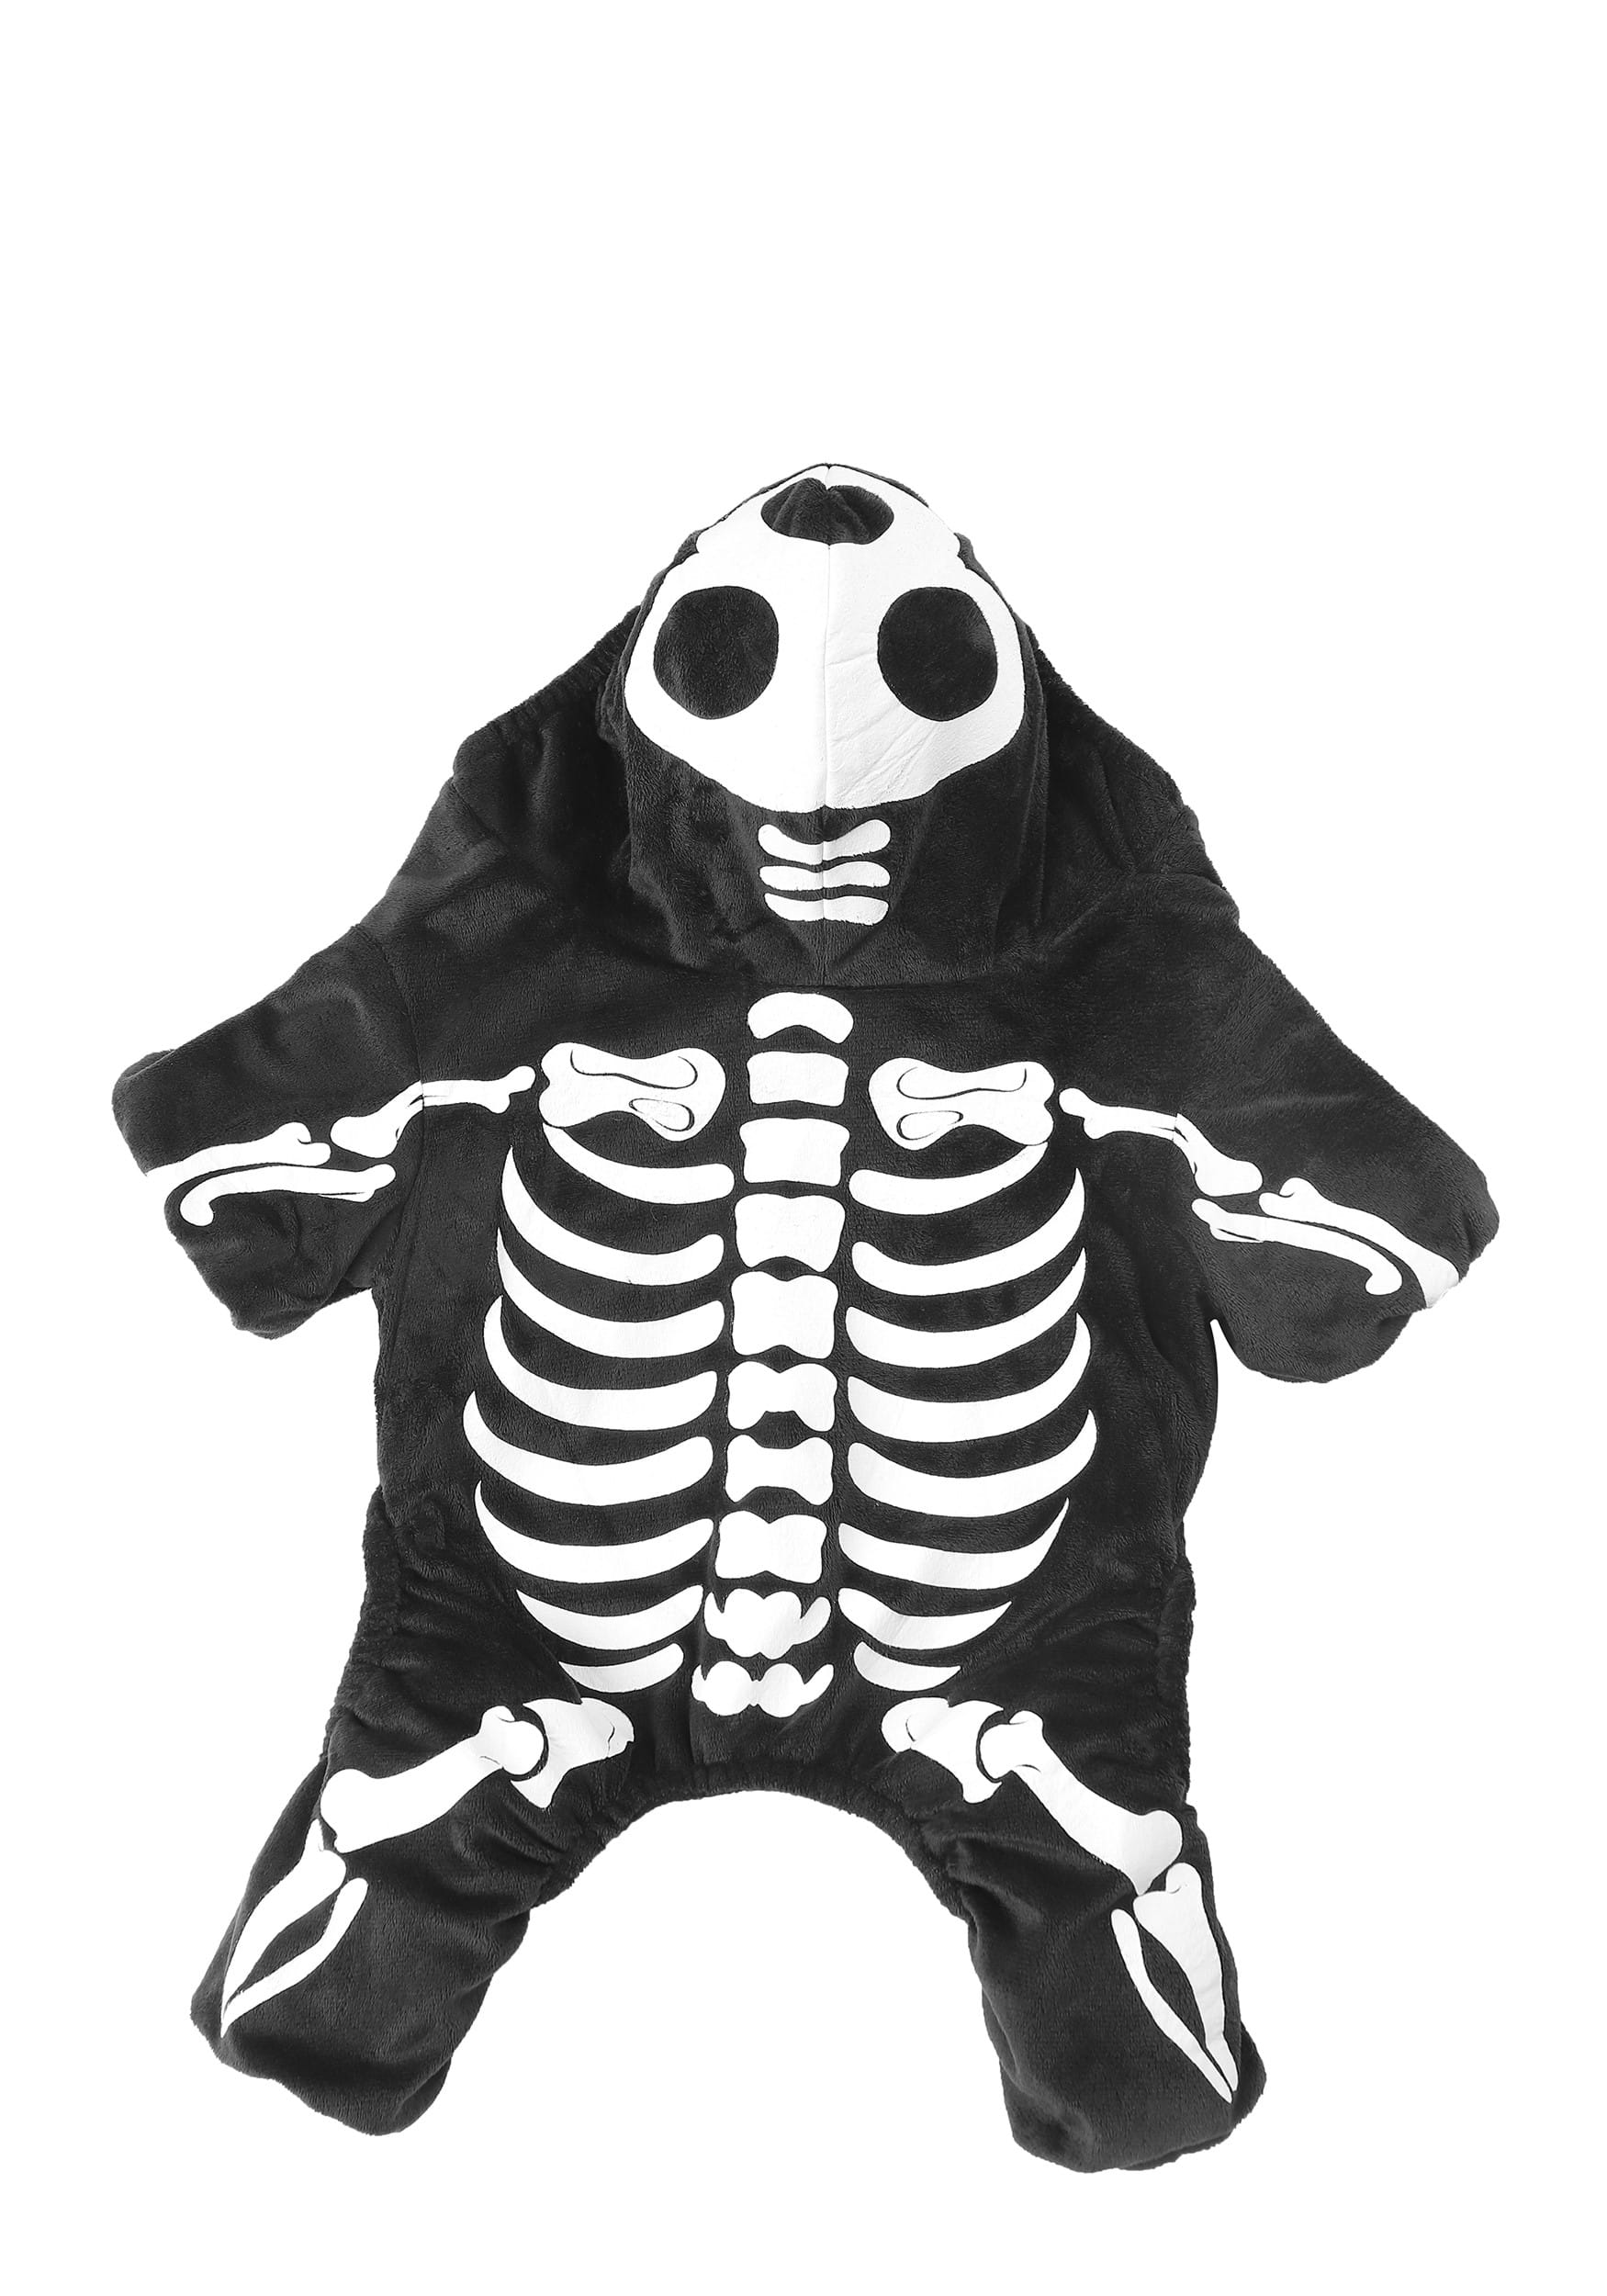 Halloween Skeleton Costumes for Pets Dogs Cats Cosplay Sweatshirt Halloween Party Skeleton Shirt Funny Pets Kitten Puppies Dress Up Apparel Clothes for Small Medium Dogs 